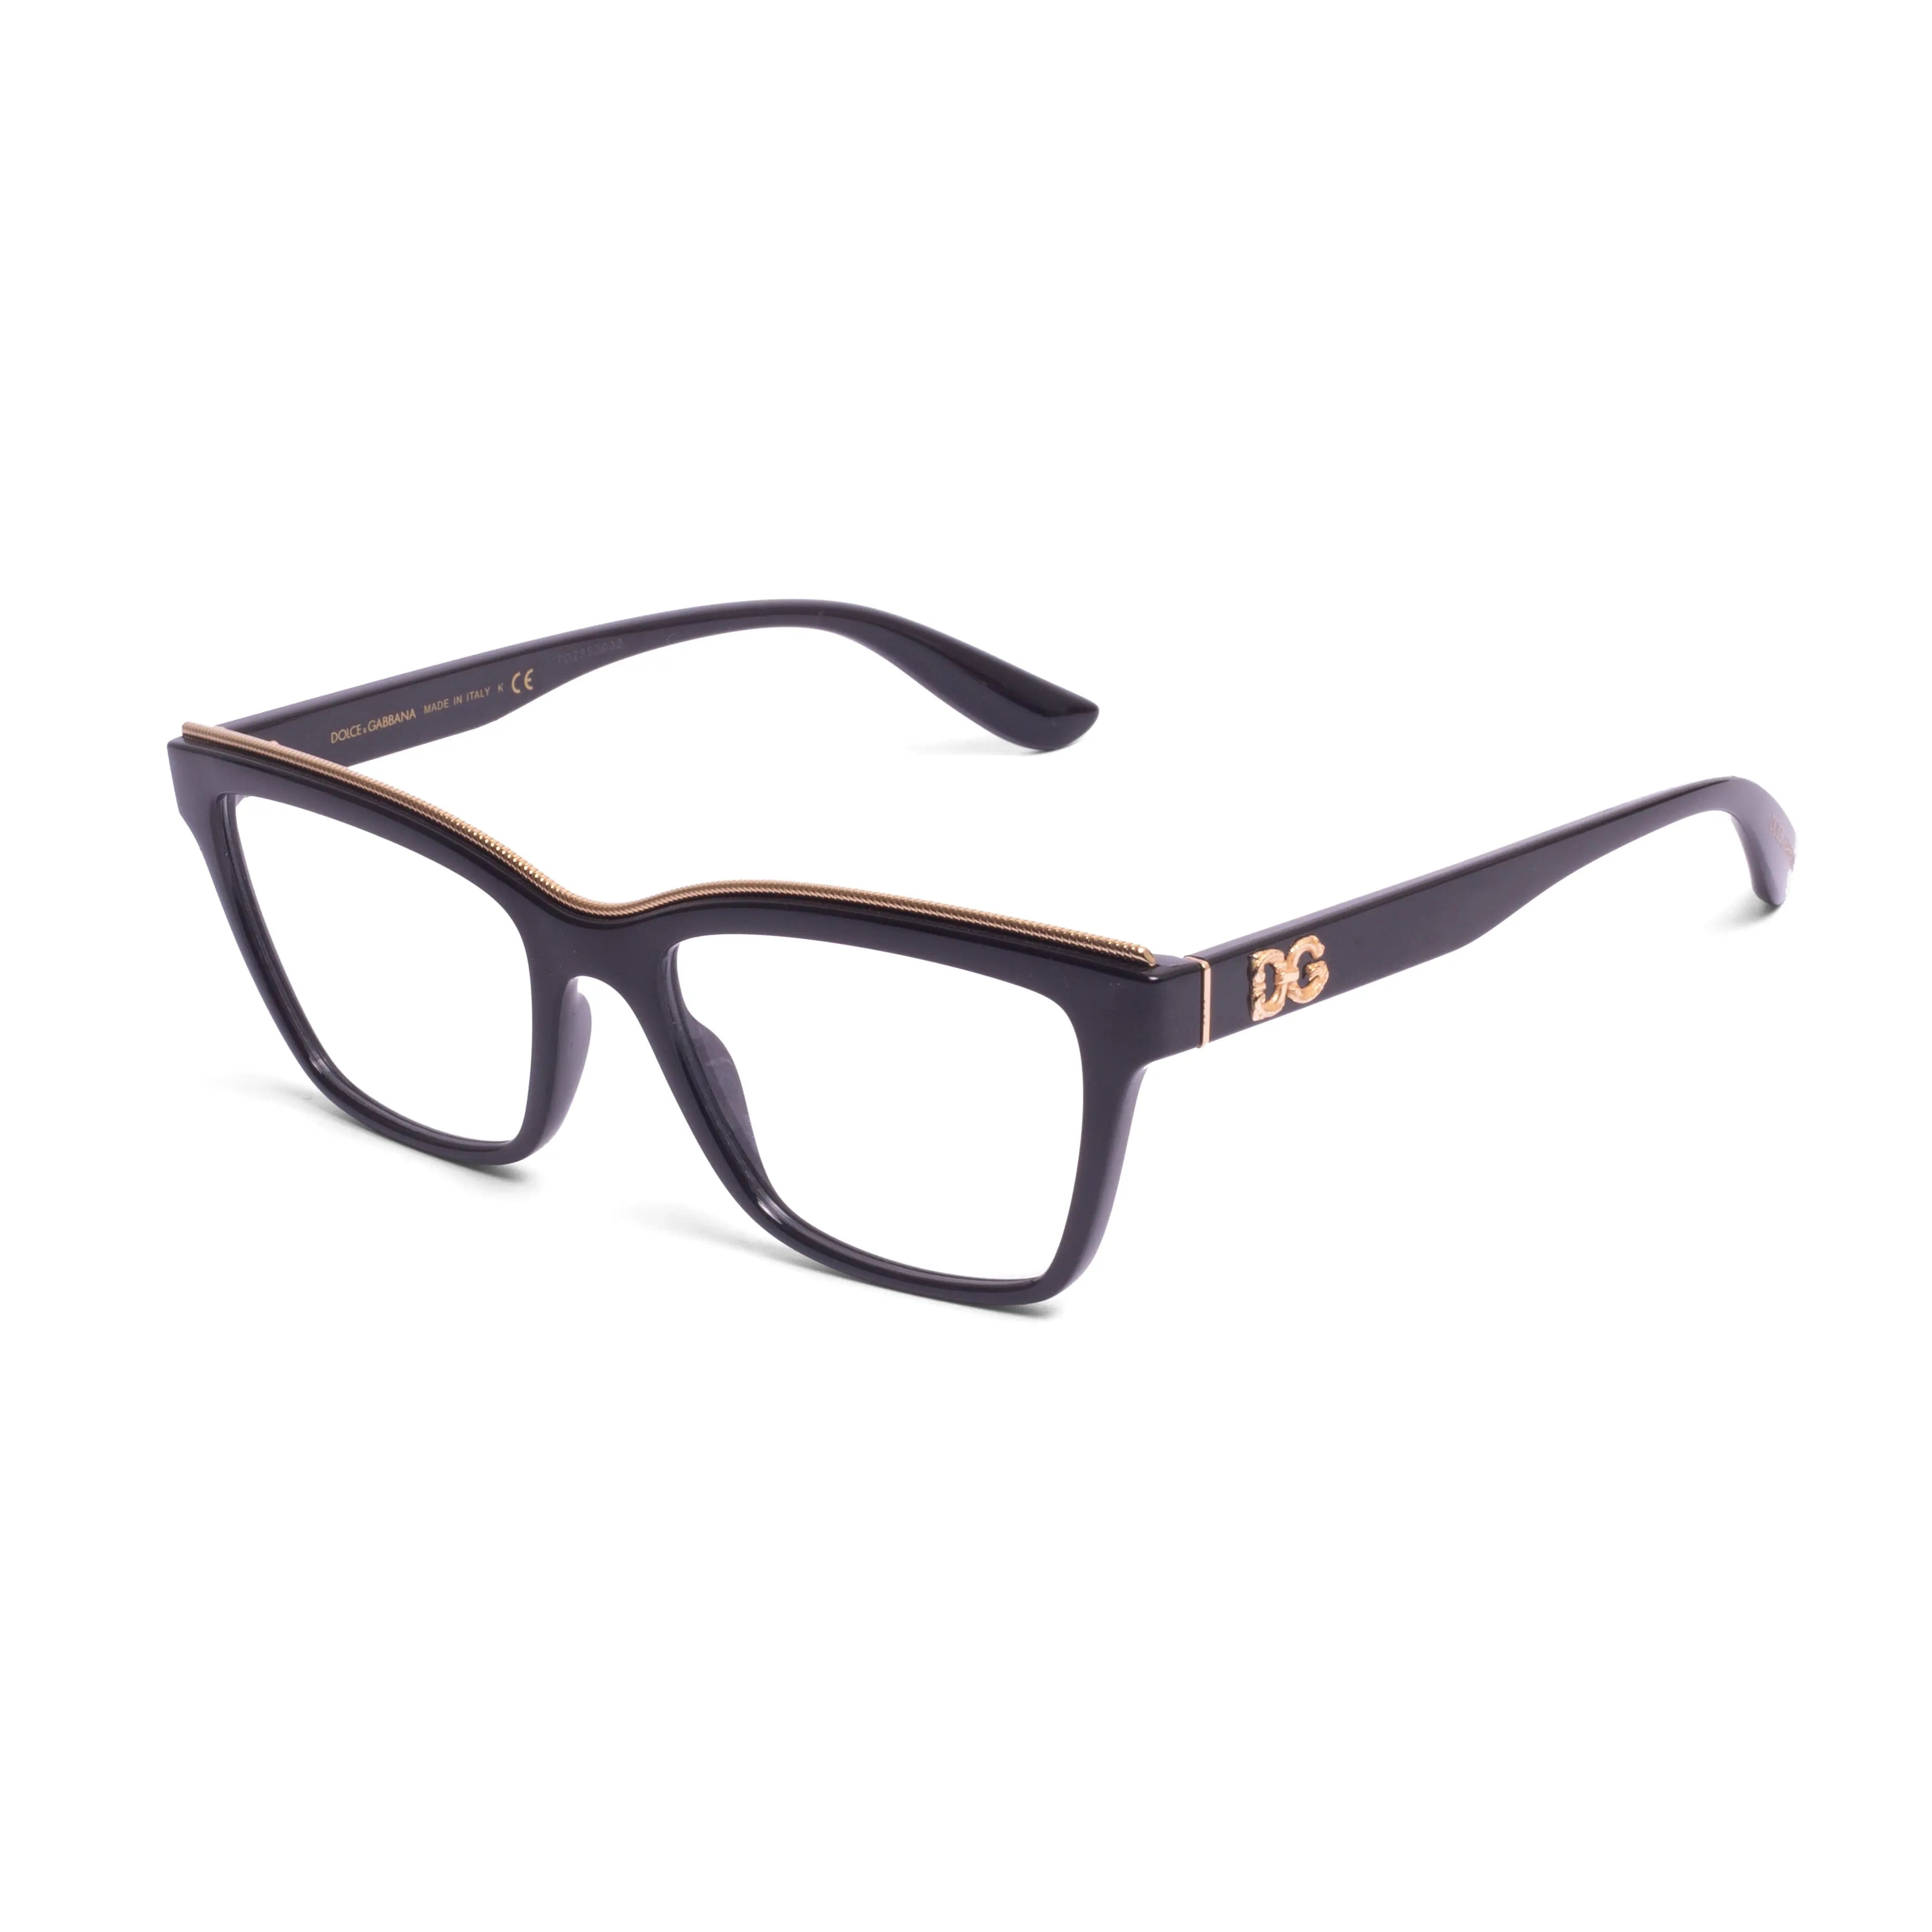 Dolce & Gabbana (D&G) DG 5064-53-501 EyeglassesSee your best with Dolce &amp; Gabbana (D&amp;G) DG 5064-53-501 Eyeglasses! Crafted with the finest materials and designed for superior style, these eyeglasses will Eyeglasses